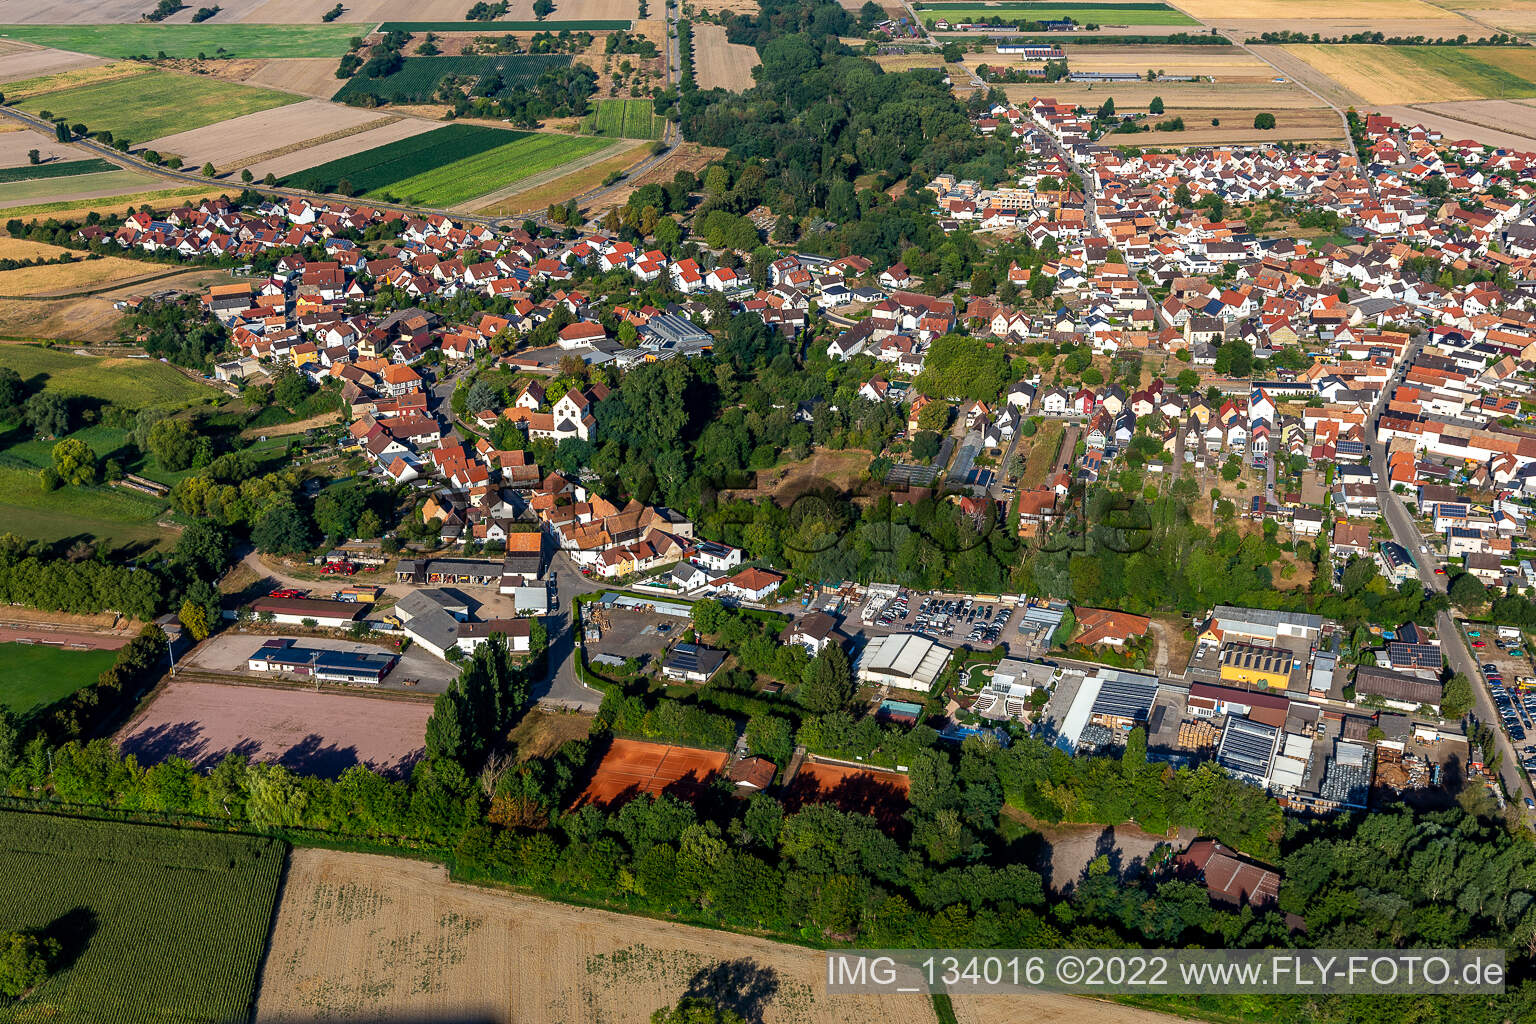 Hördt in the state Rhineland-Palatinate, Germany seen from above